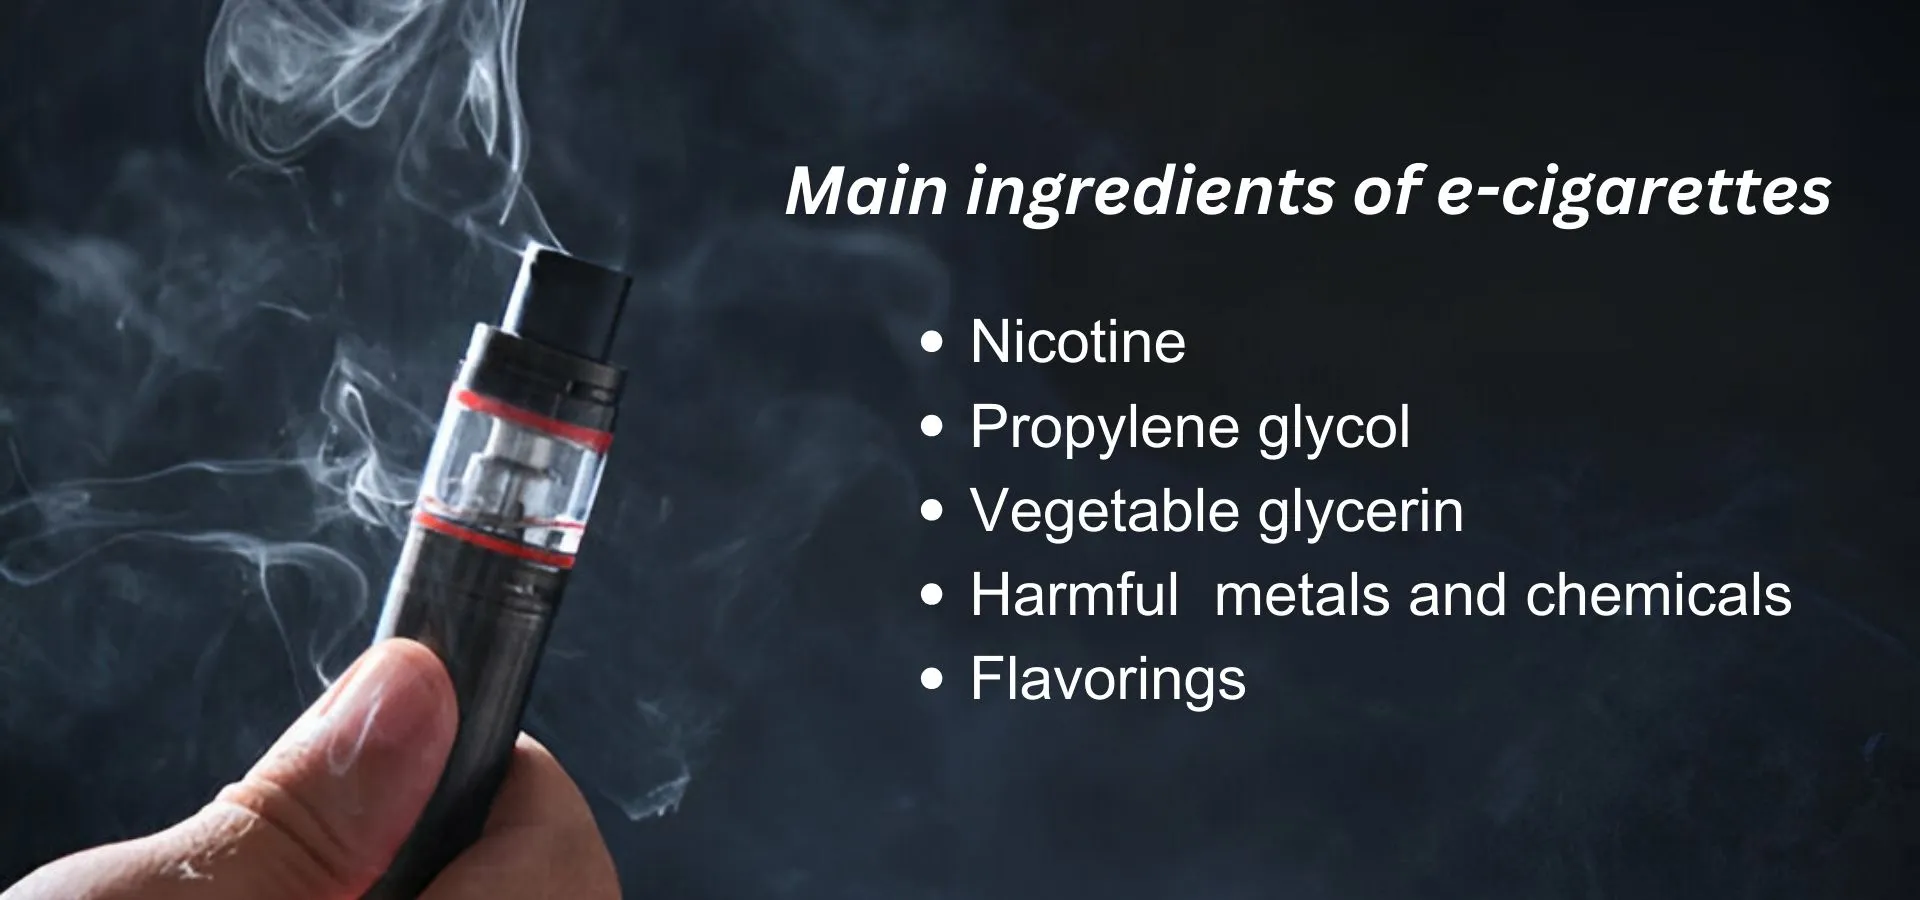 main ingredients of e-cigarettes